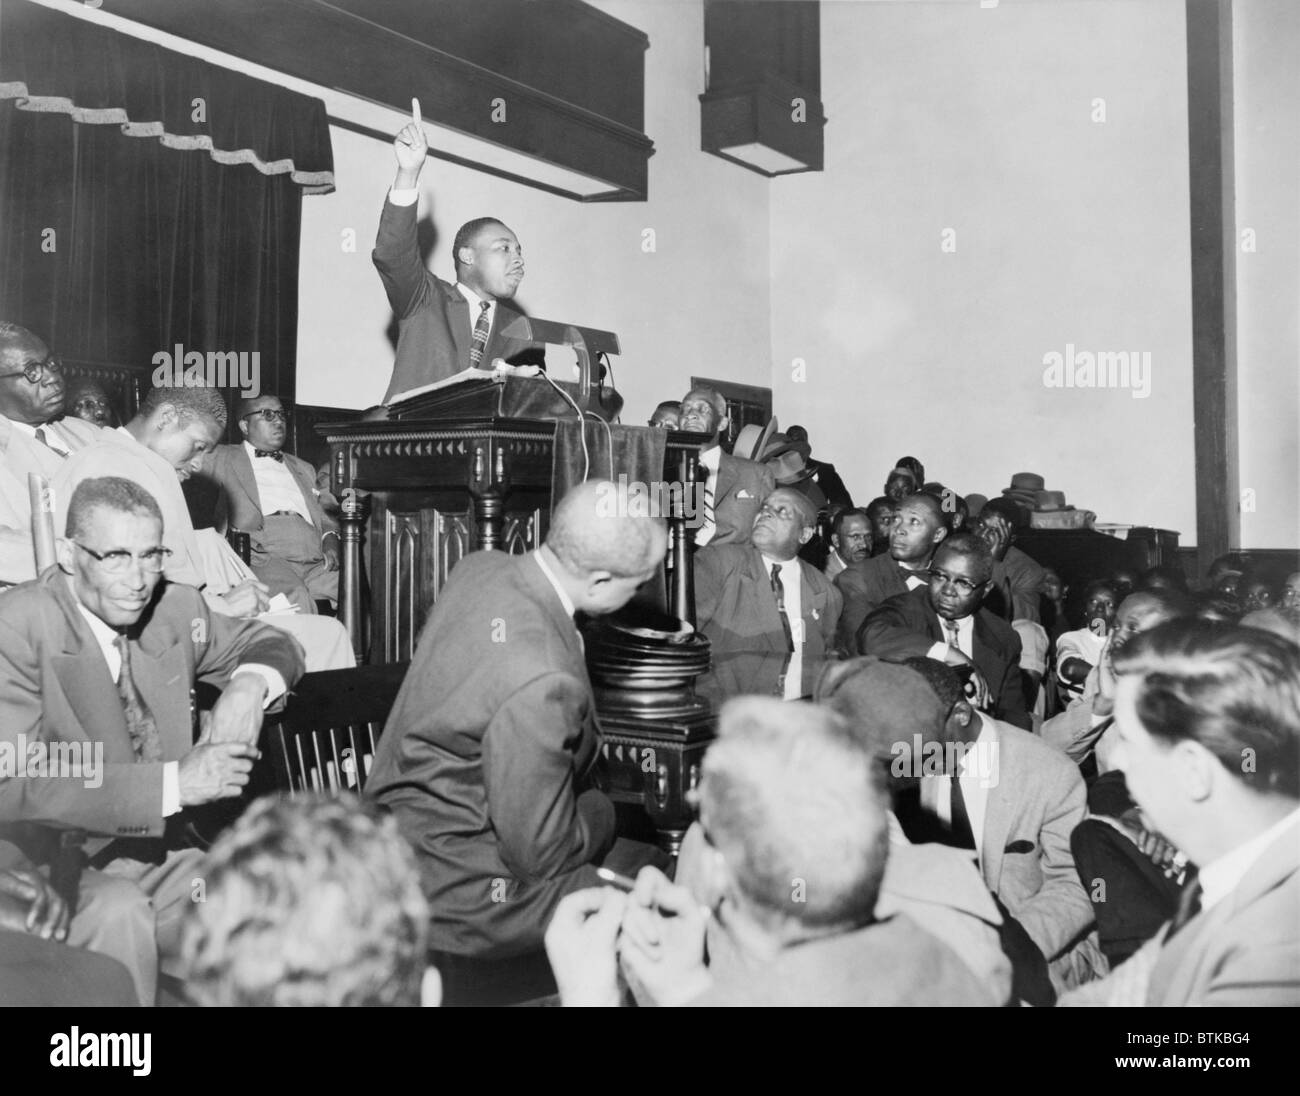 Rev. Martin Luther King, Jr., speaking at a meeting of the Montgomery Improvement Association, the organization form after Rosa Parks was arrested for not moving to the back of the bus. Earlier, King, then, only 27 years old, was elected the organization's leader. 1956. Stock Photo